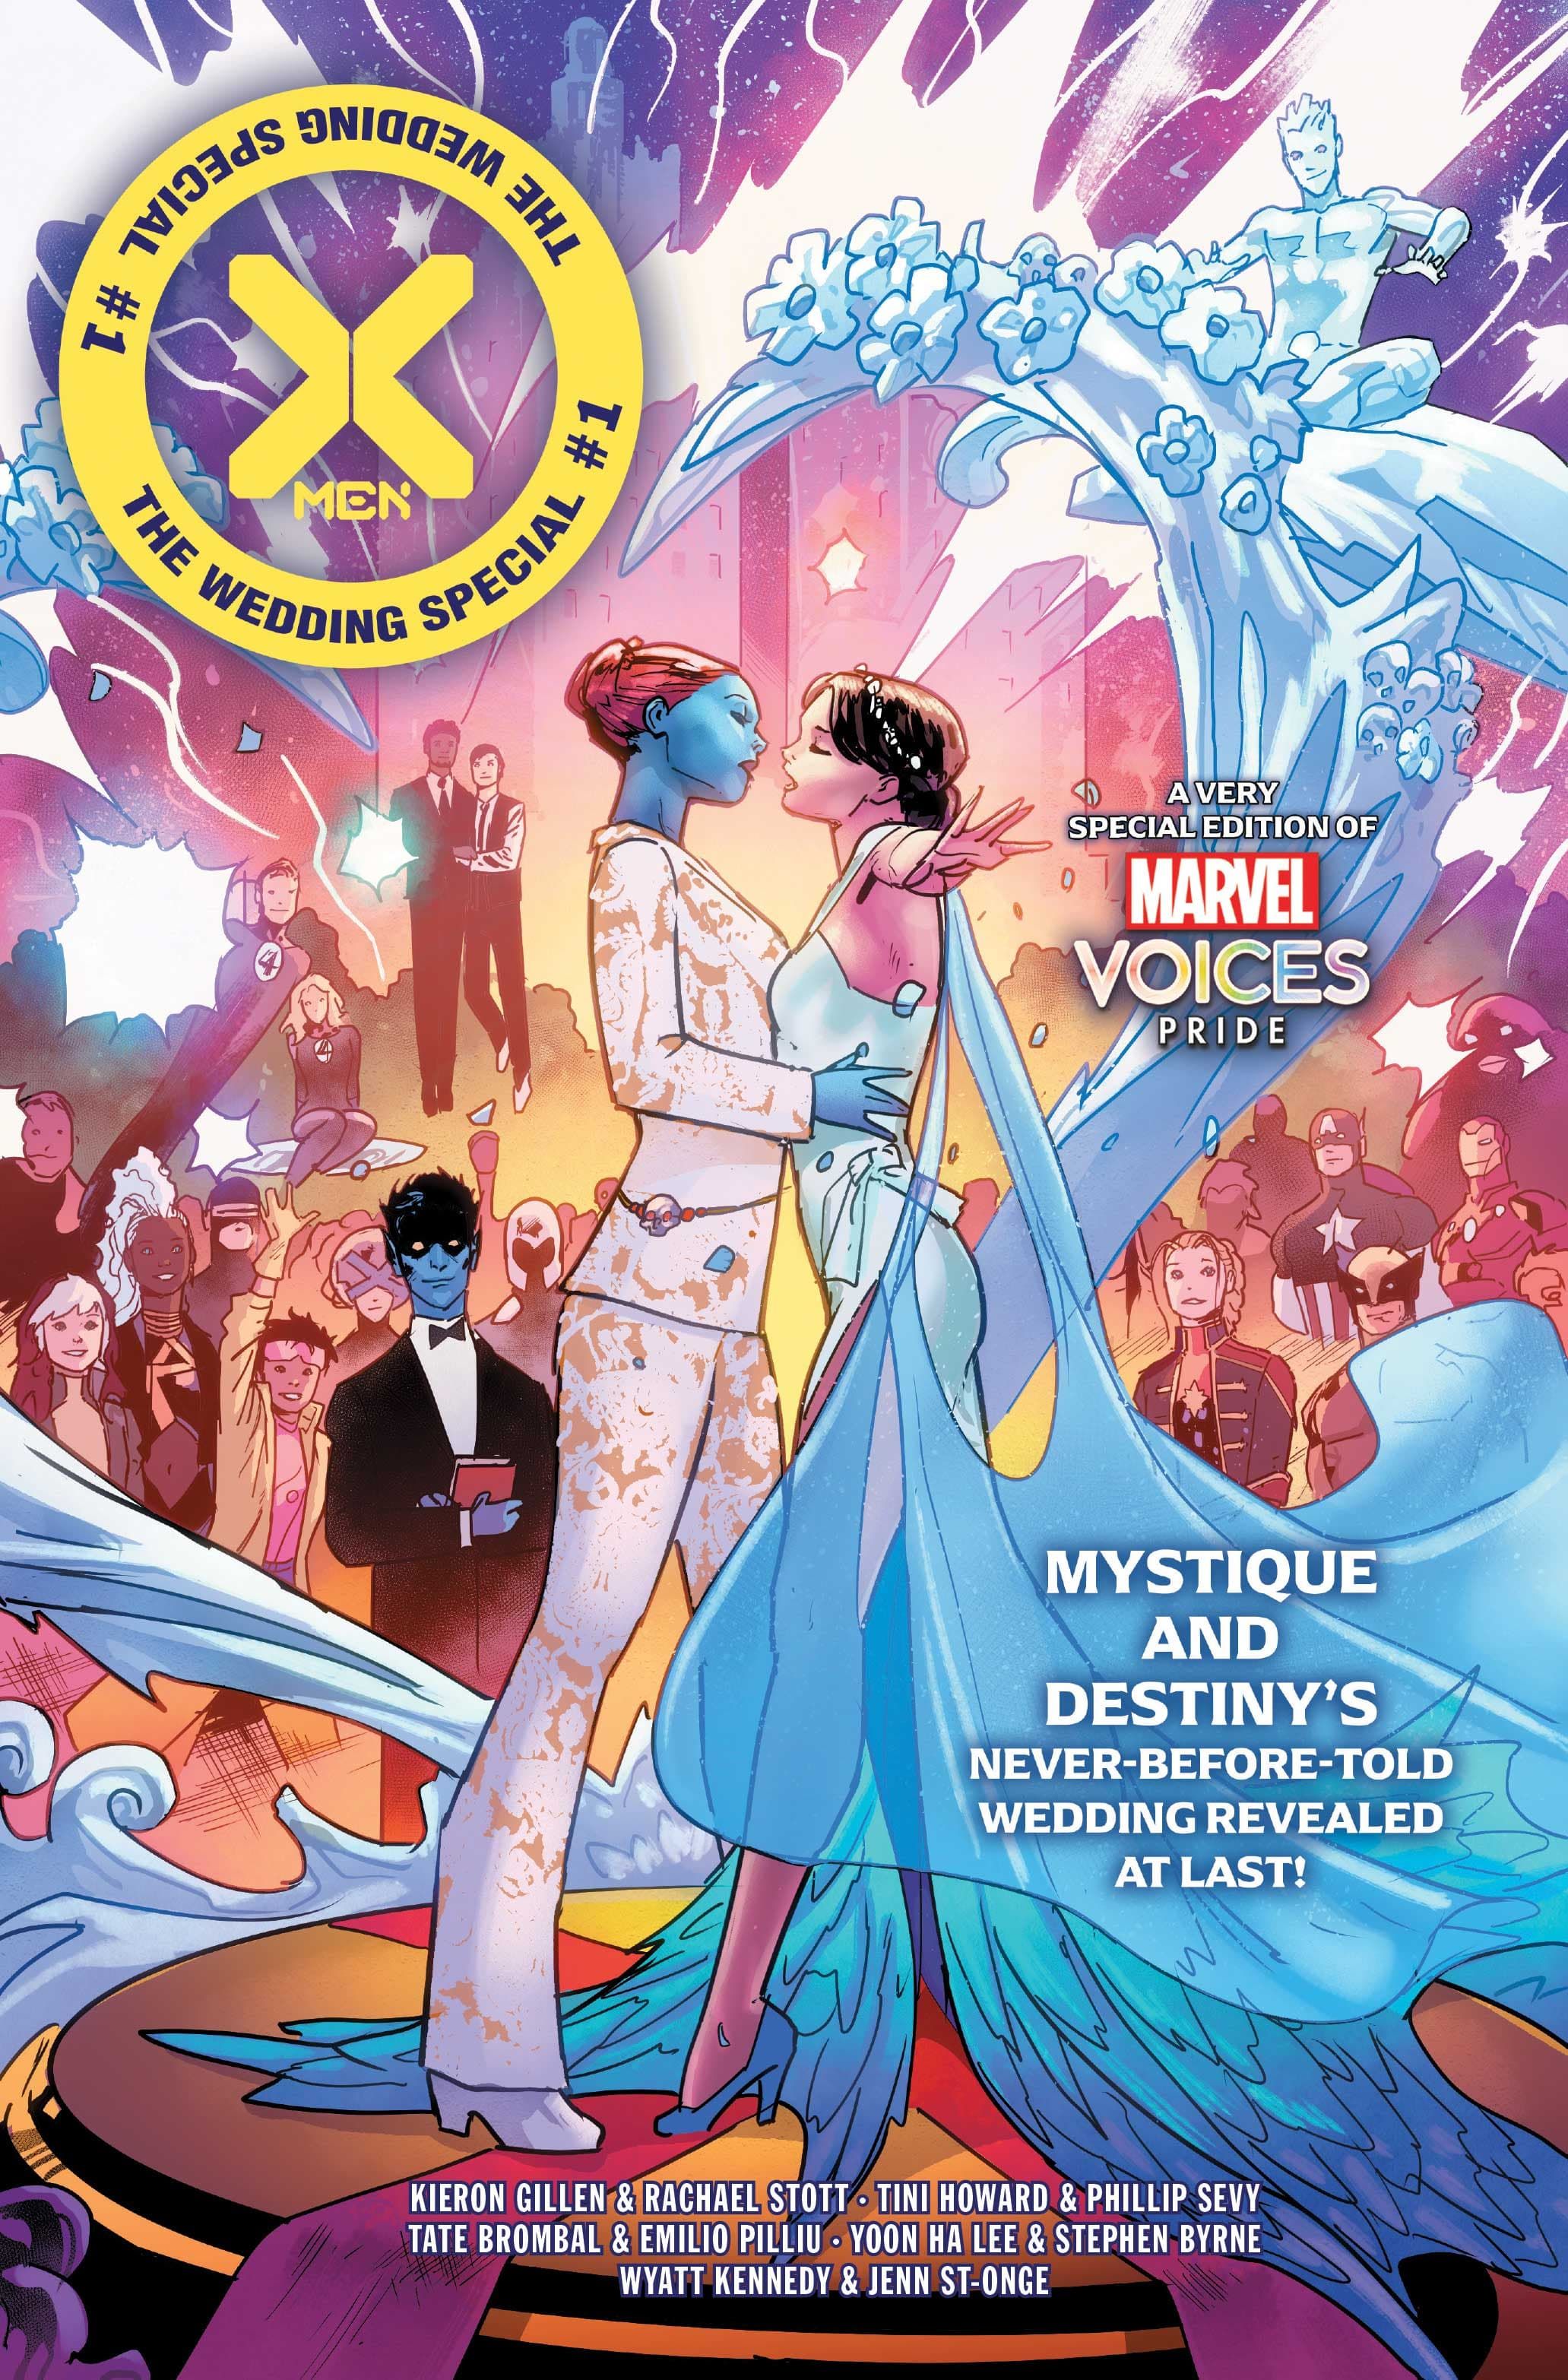 X-Men’s Mystique and Destiny Tie the Knot in First Look at Marvel’s Pride Month Special